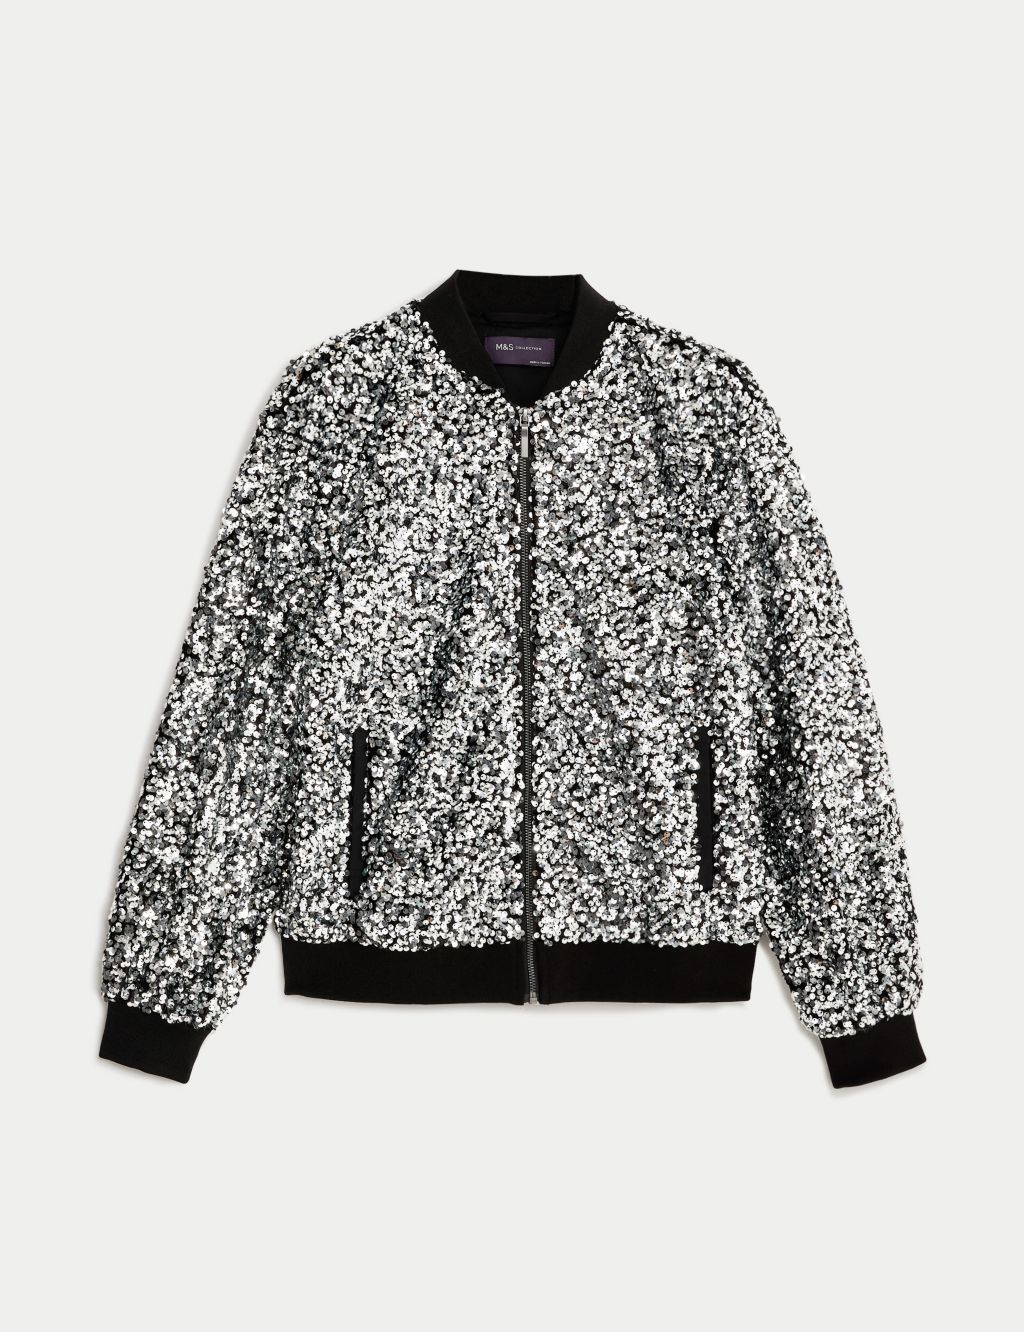 Sequin Relaxed Bomber Jacket image 2